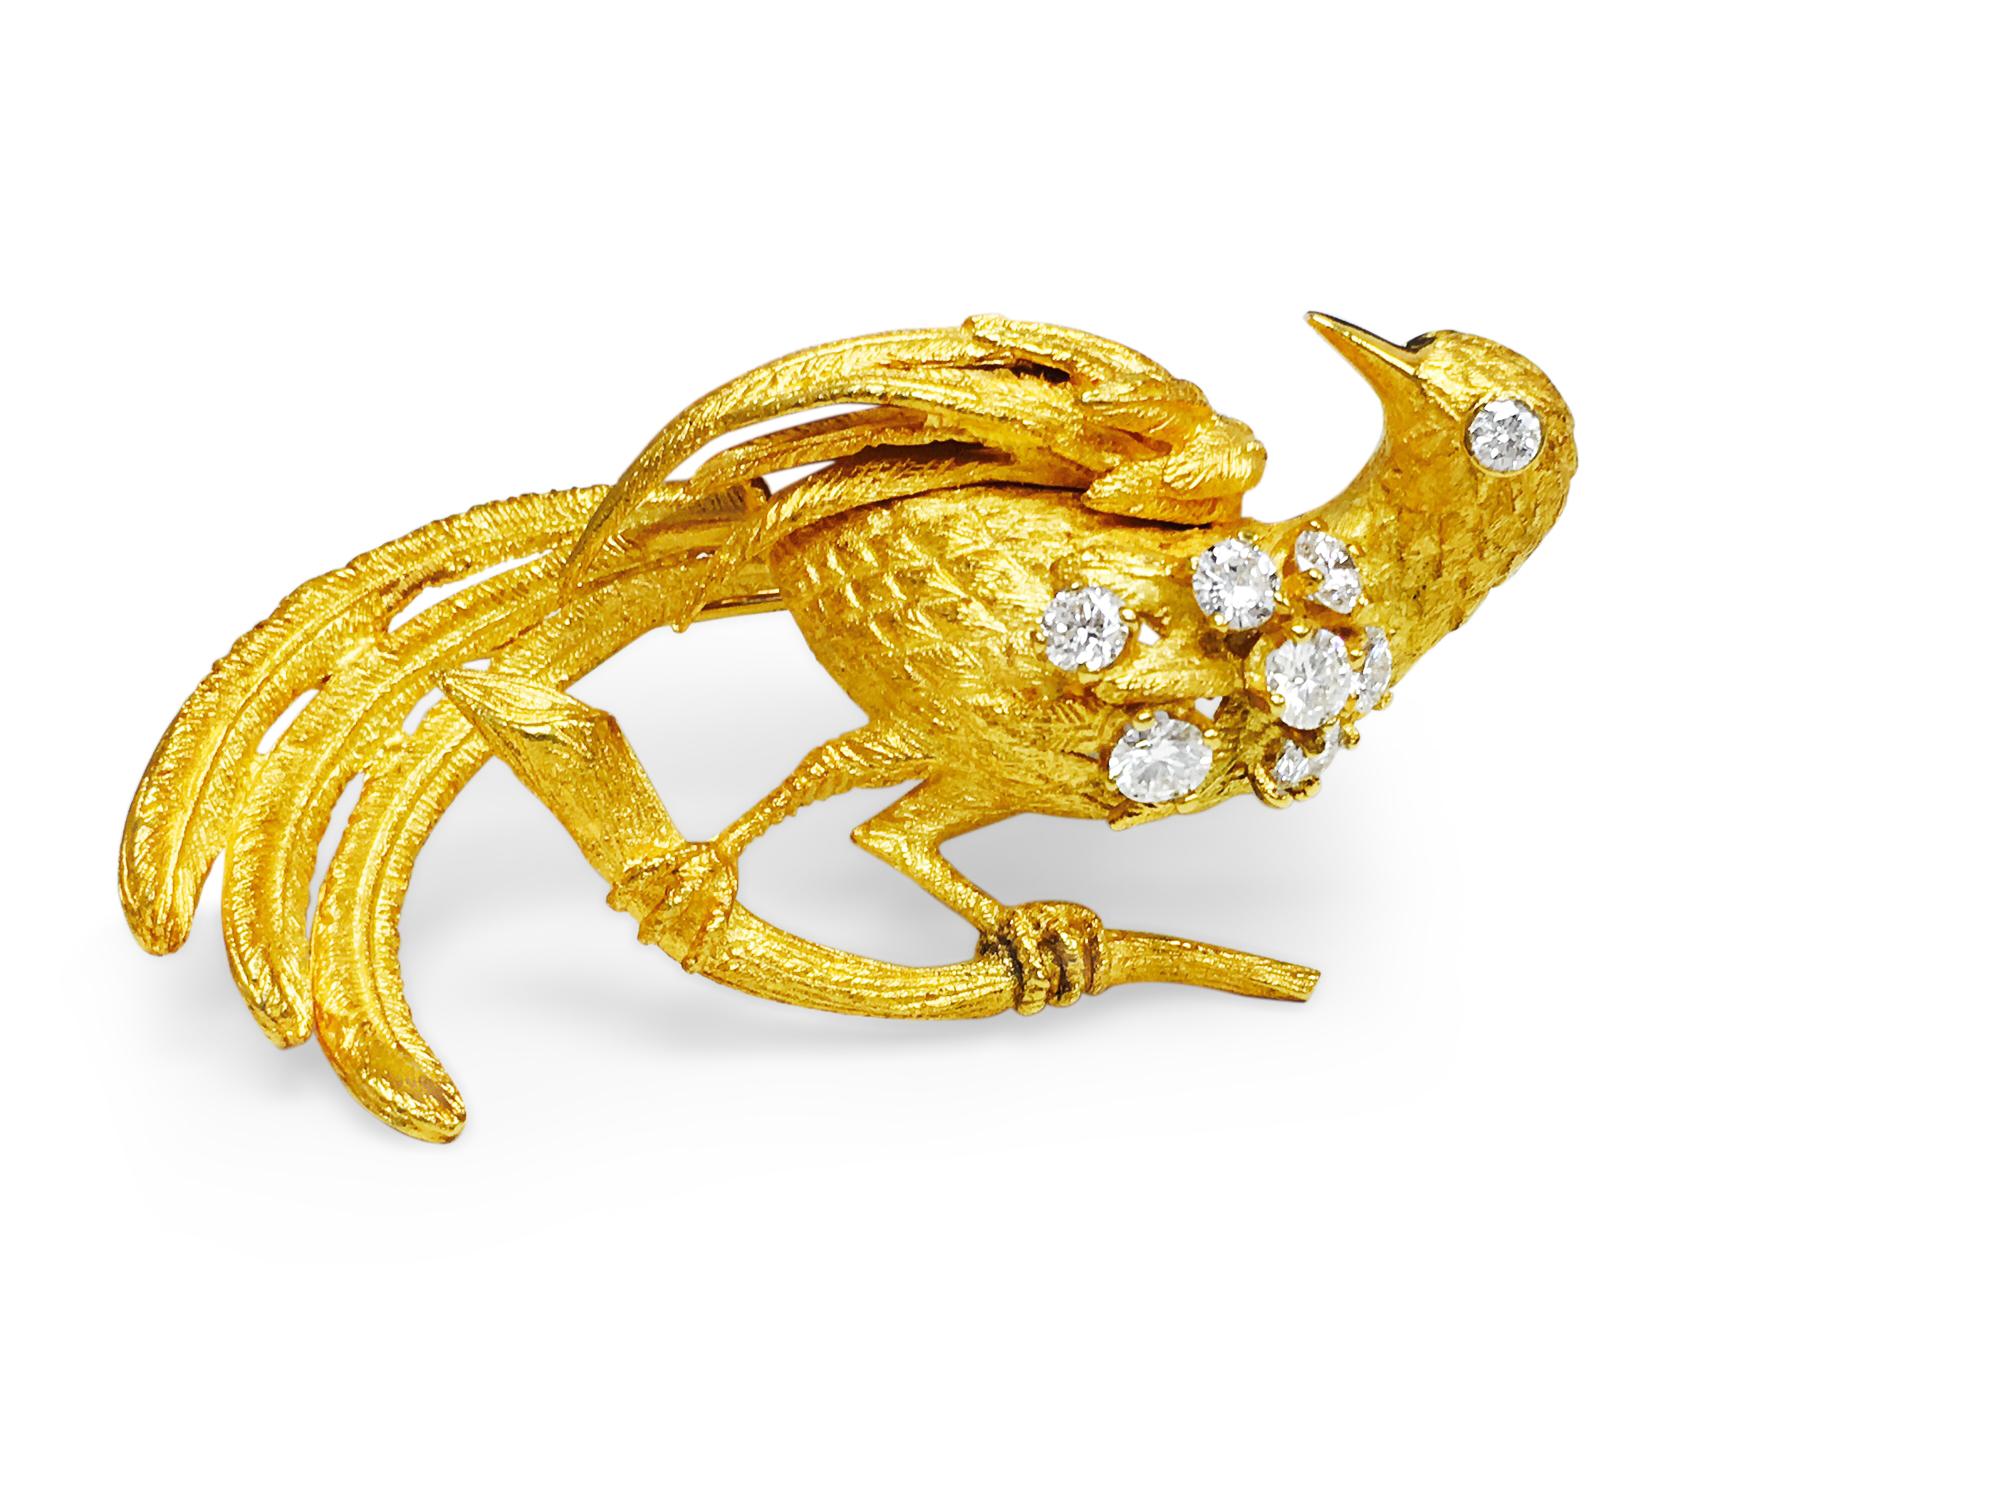 A pretty and special bird-shaped pin made of 18-karat yellow gold with very clear and sparkling diamonds. The diamonds weigh a total of 1.00 carat and are of top-notch quality with very few imperfections (VVS clarity) and a color grade of E-F. They